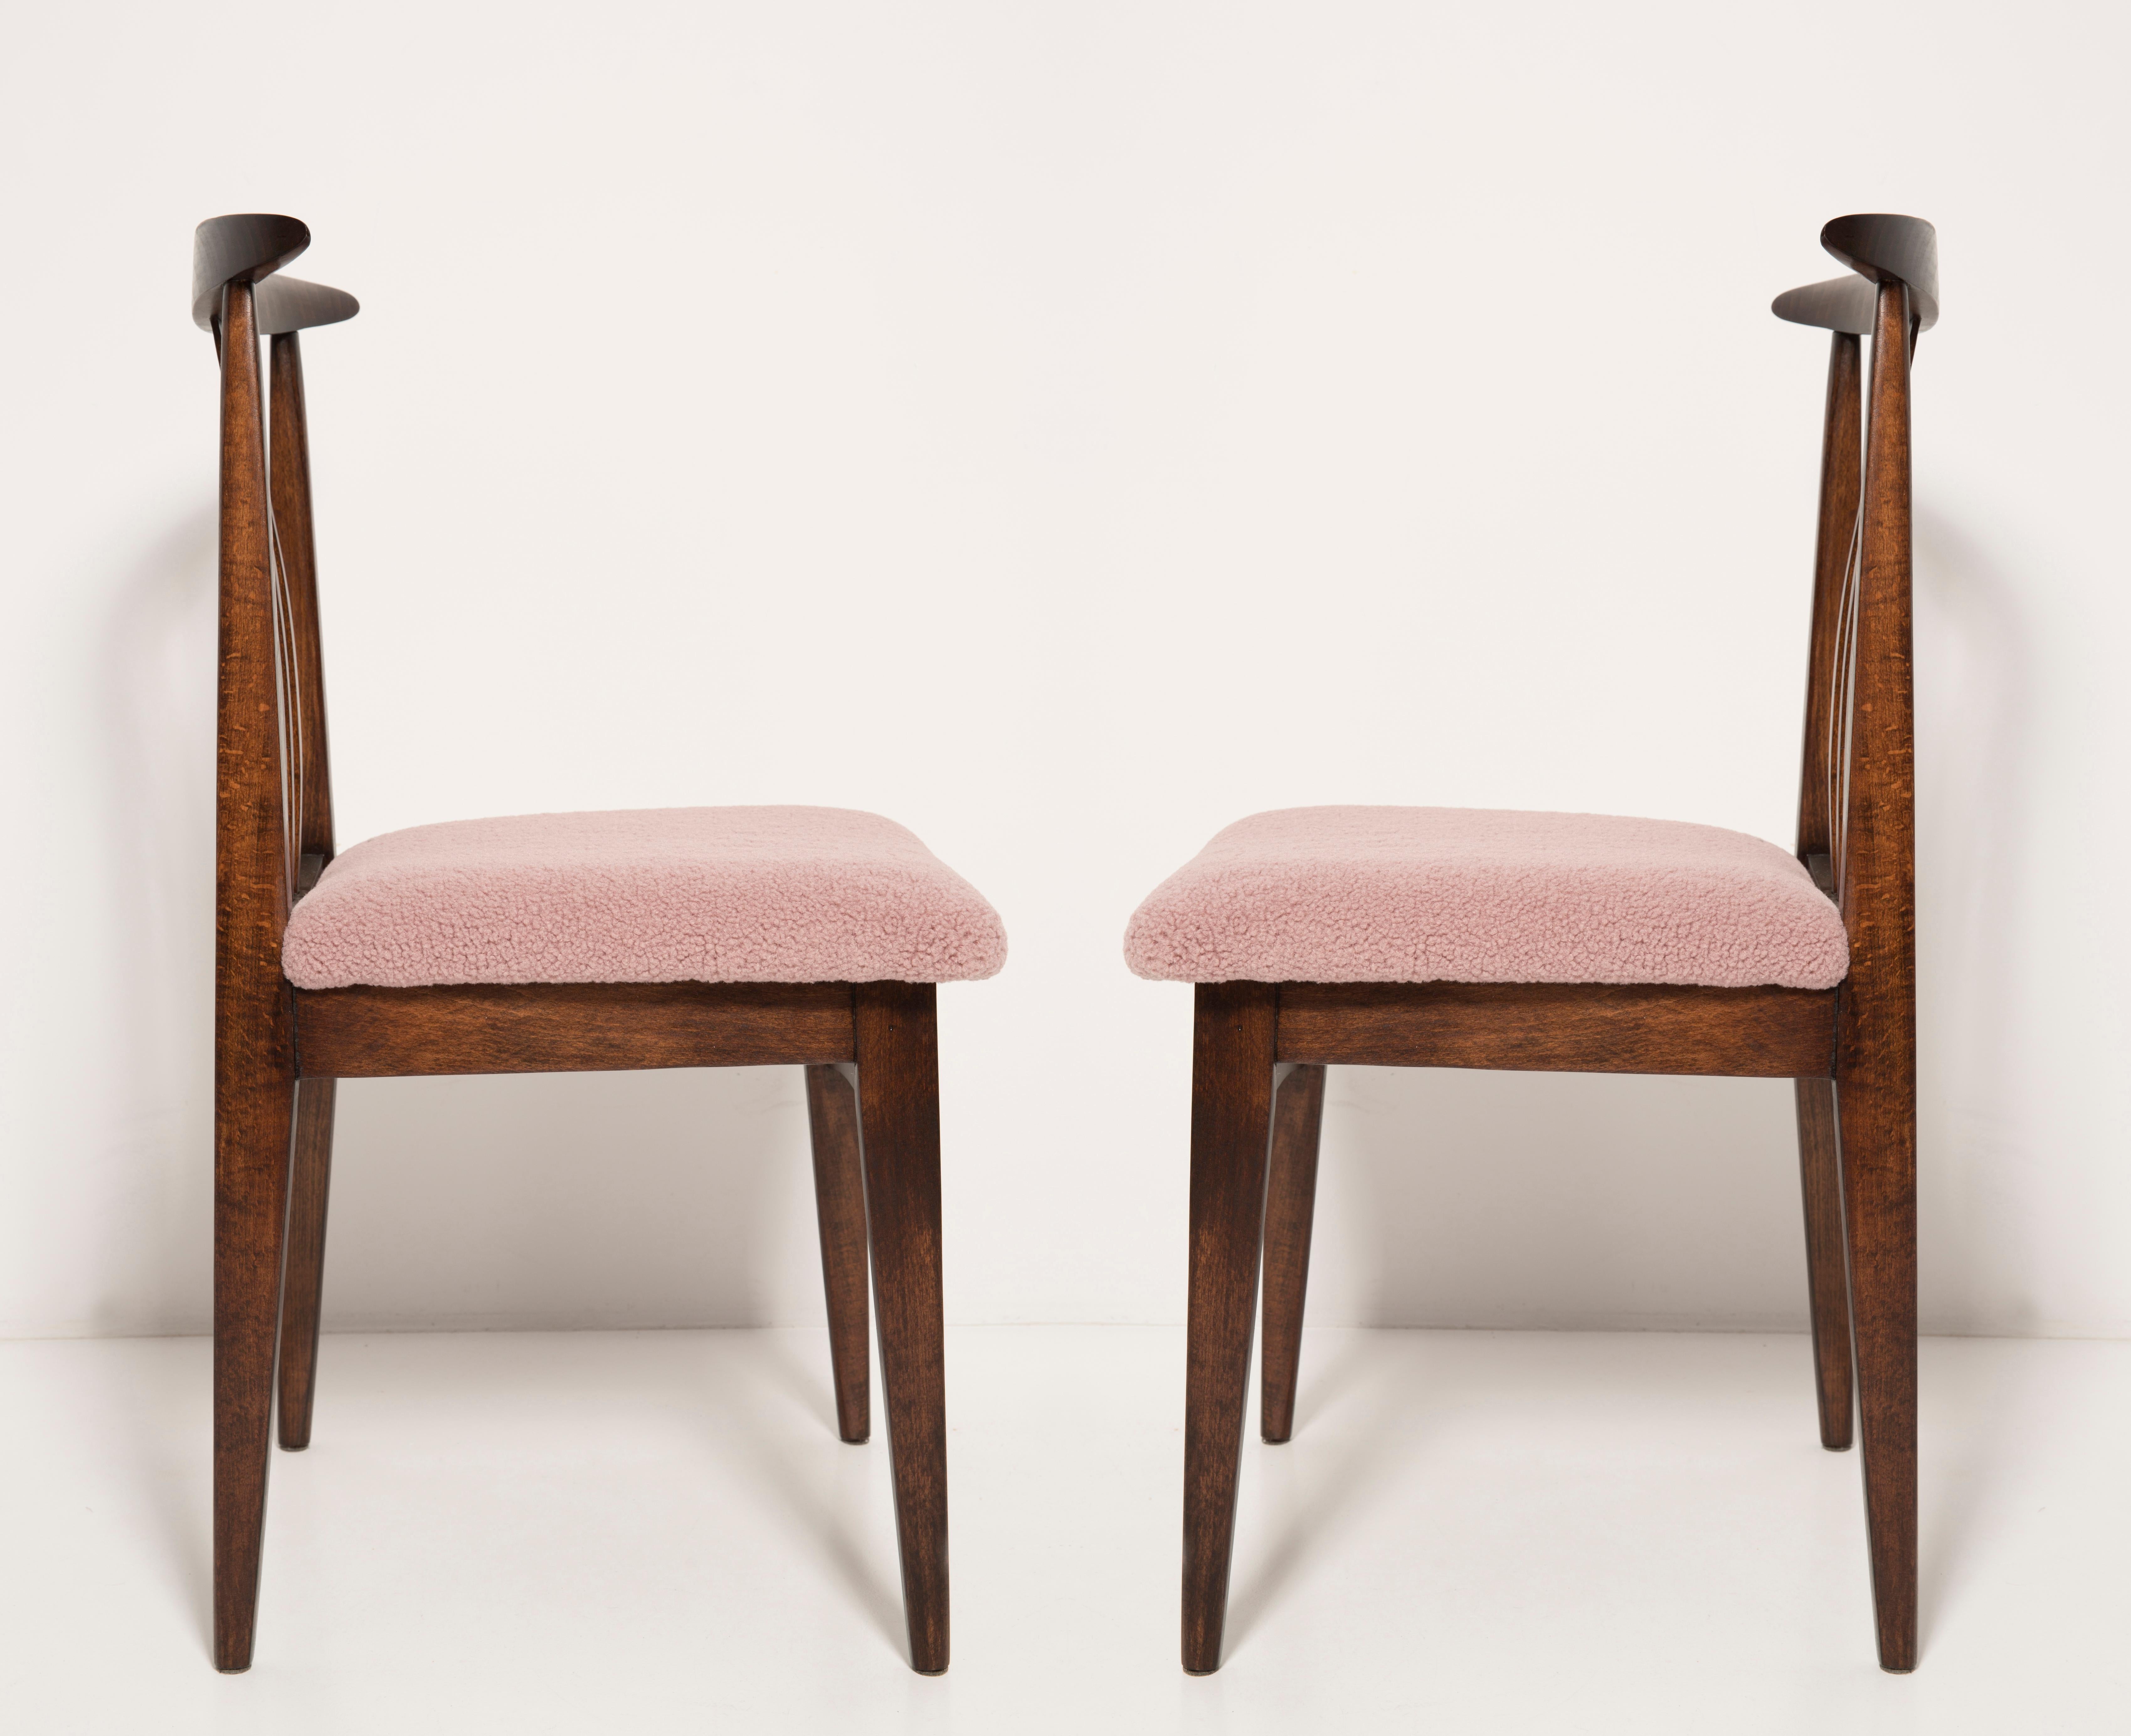 Polish Pair of Mid-Century Pink Boucle Chairs, Designed by M. Zielinski, Europe, 1960s For Sale